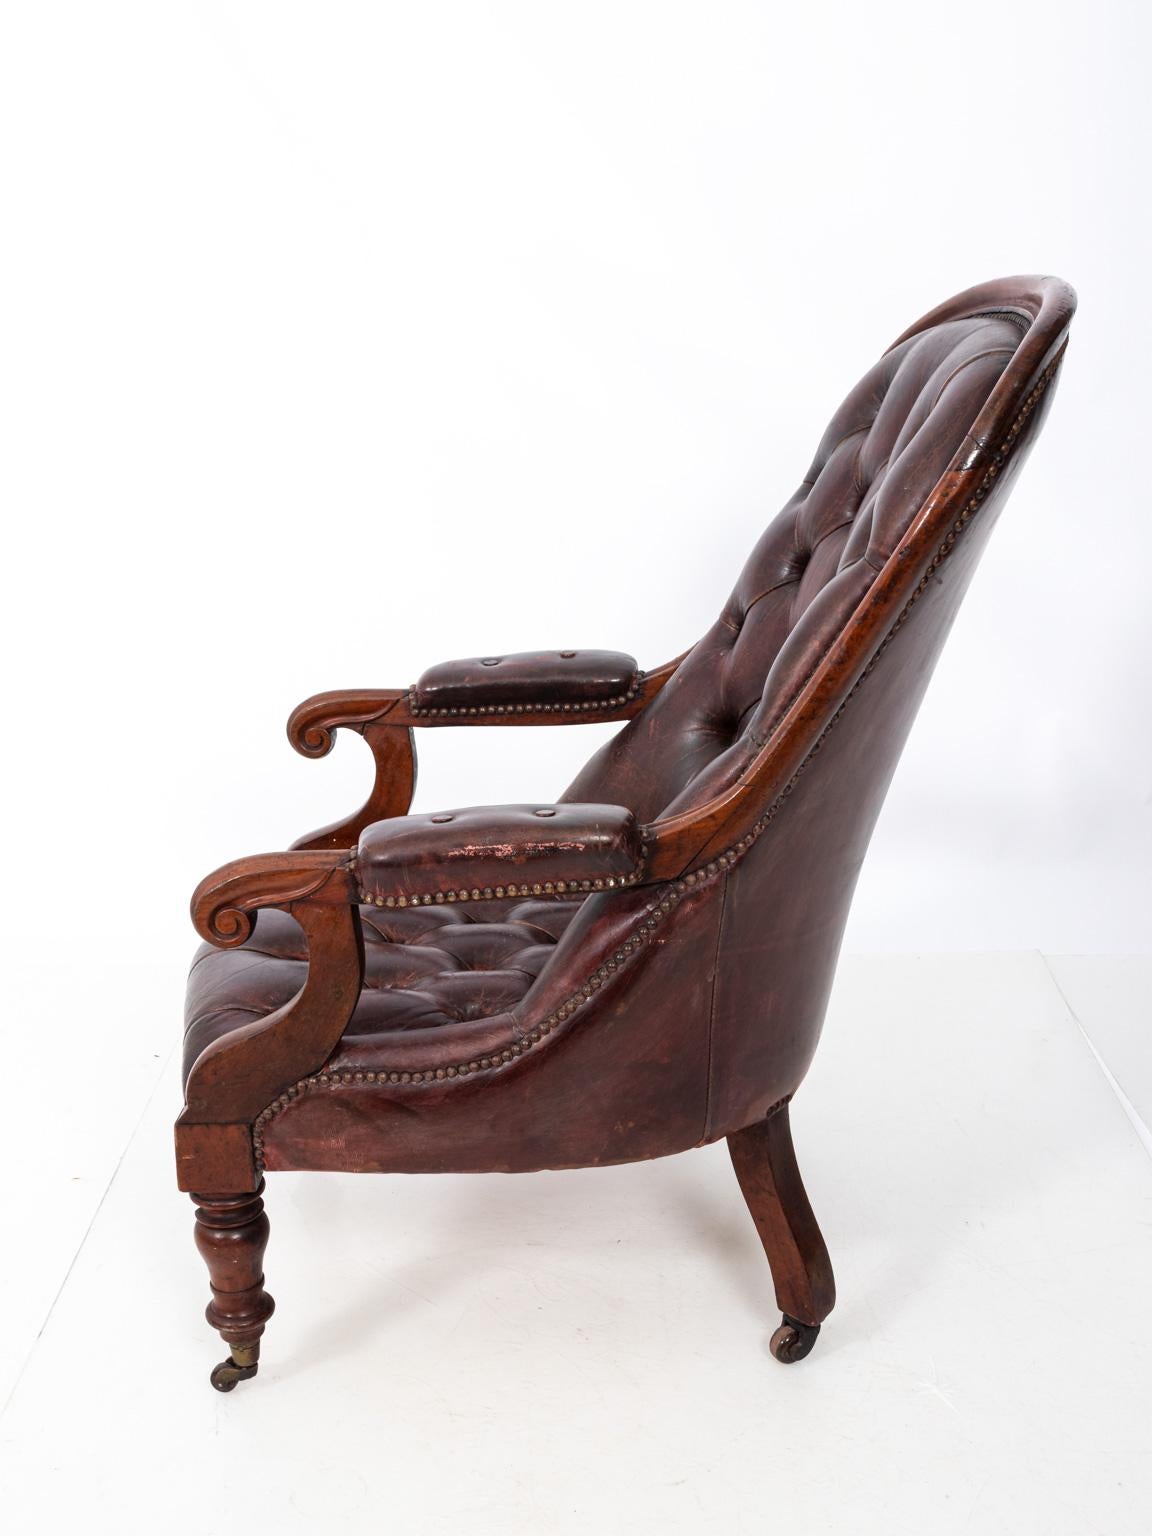 English mahogany armchair with tufted leather upholstery on casters, circa 1860s-1880s.